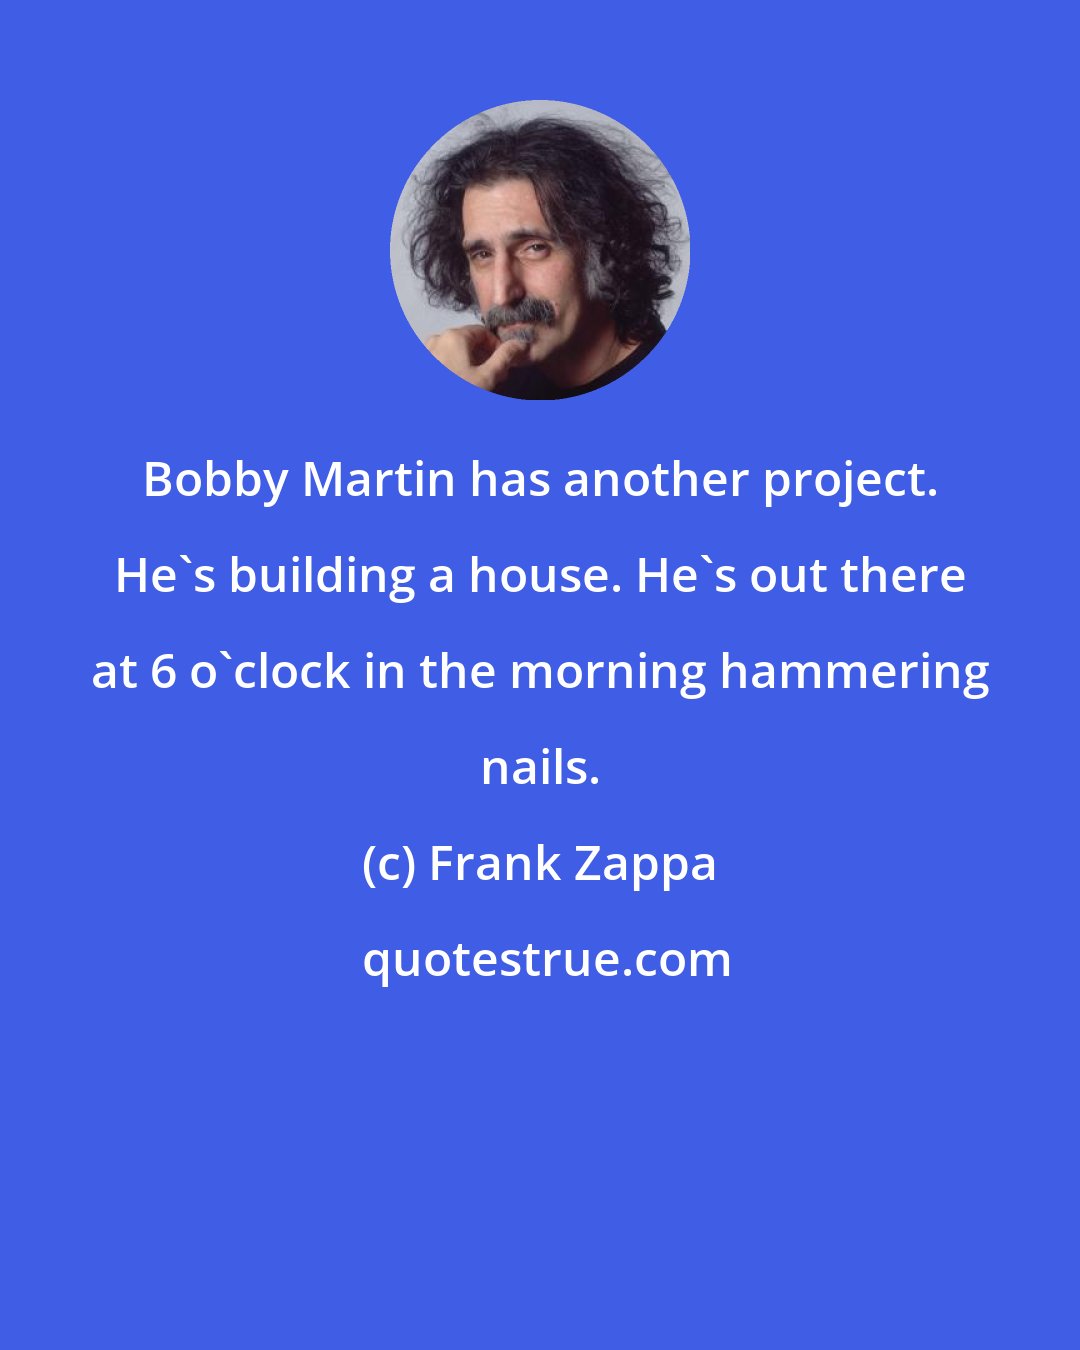 Frank Zappa: Bobby Martin has another project. He's building a house. He's out there at 6 o'clock in the morning hammering nails.